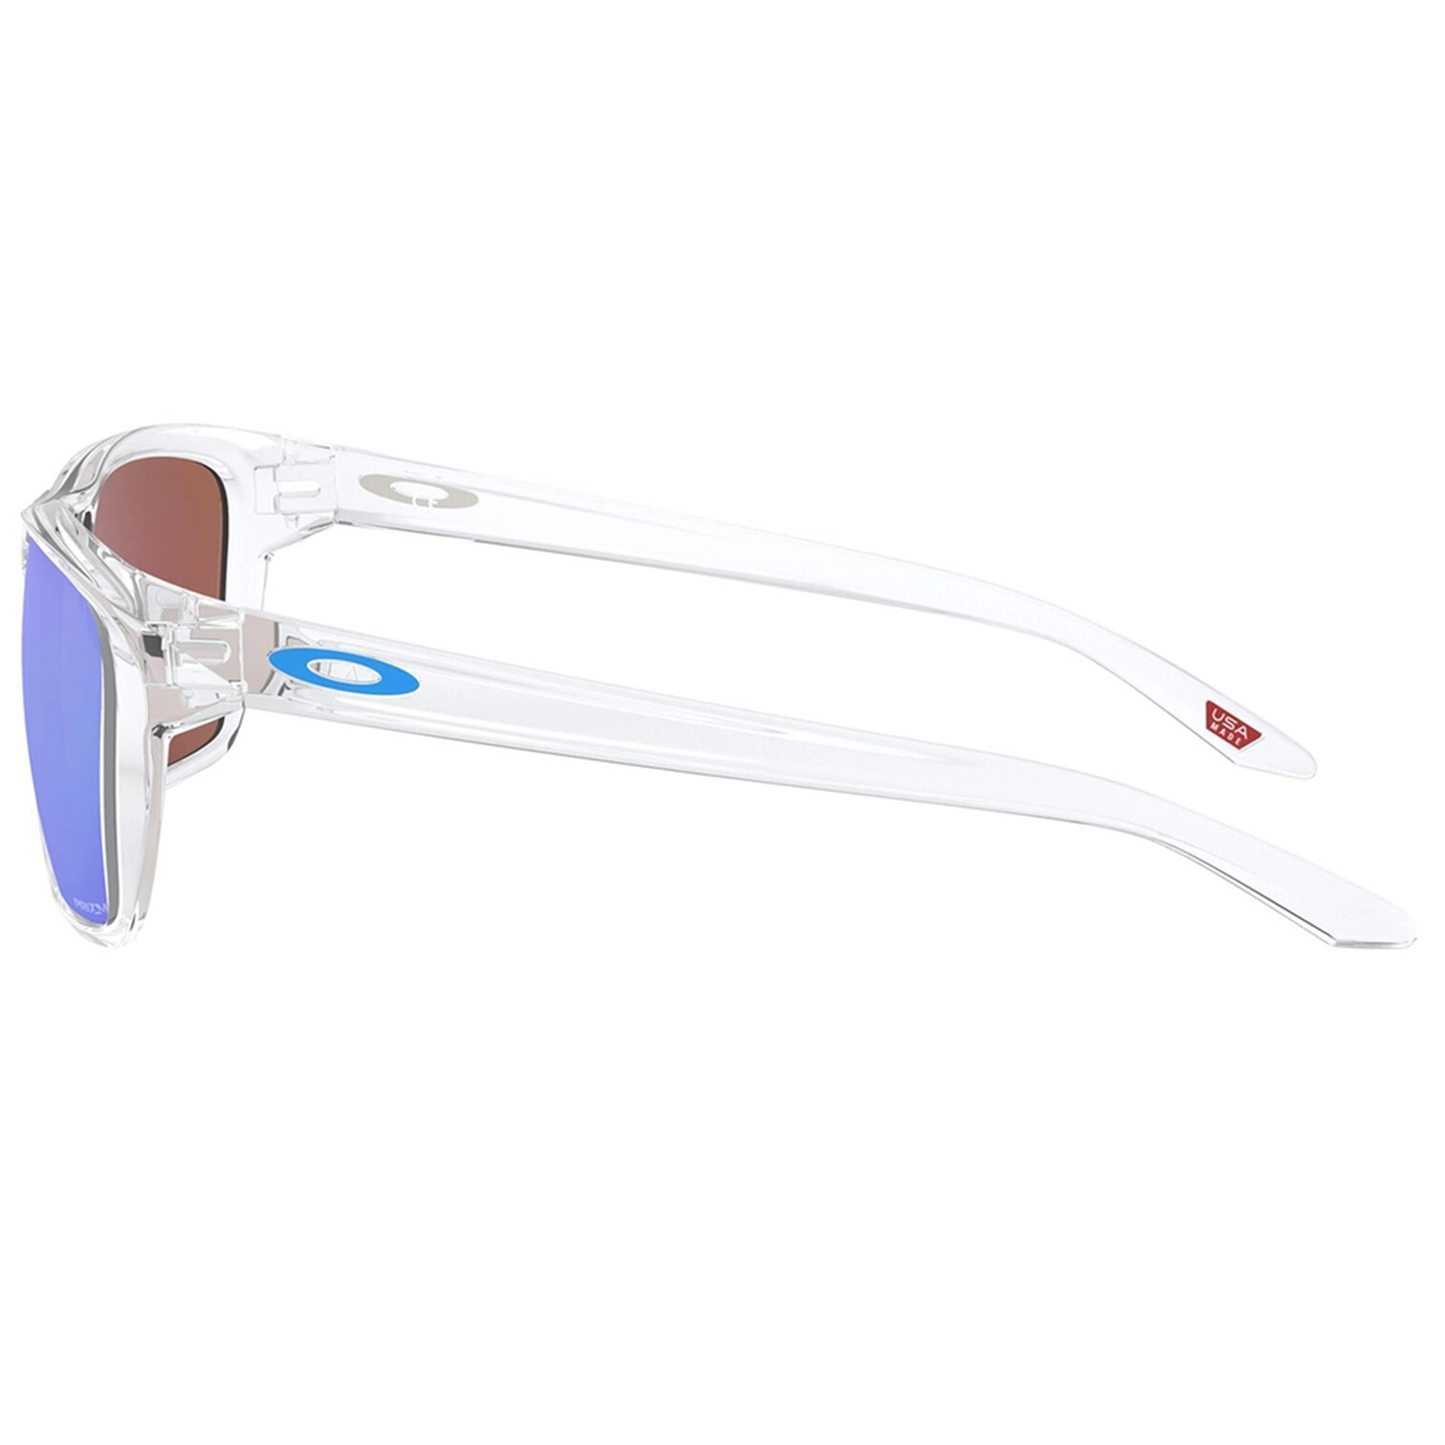 Oakley Sylas Sunglasses (Polished Clear) Prizm Sapphire Lens - Free Case